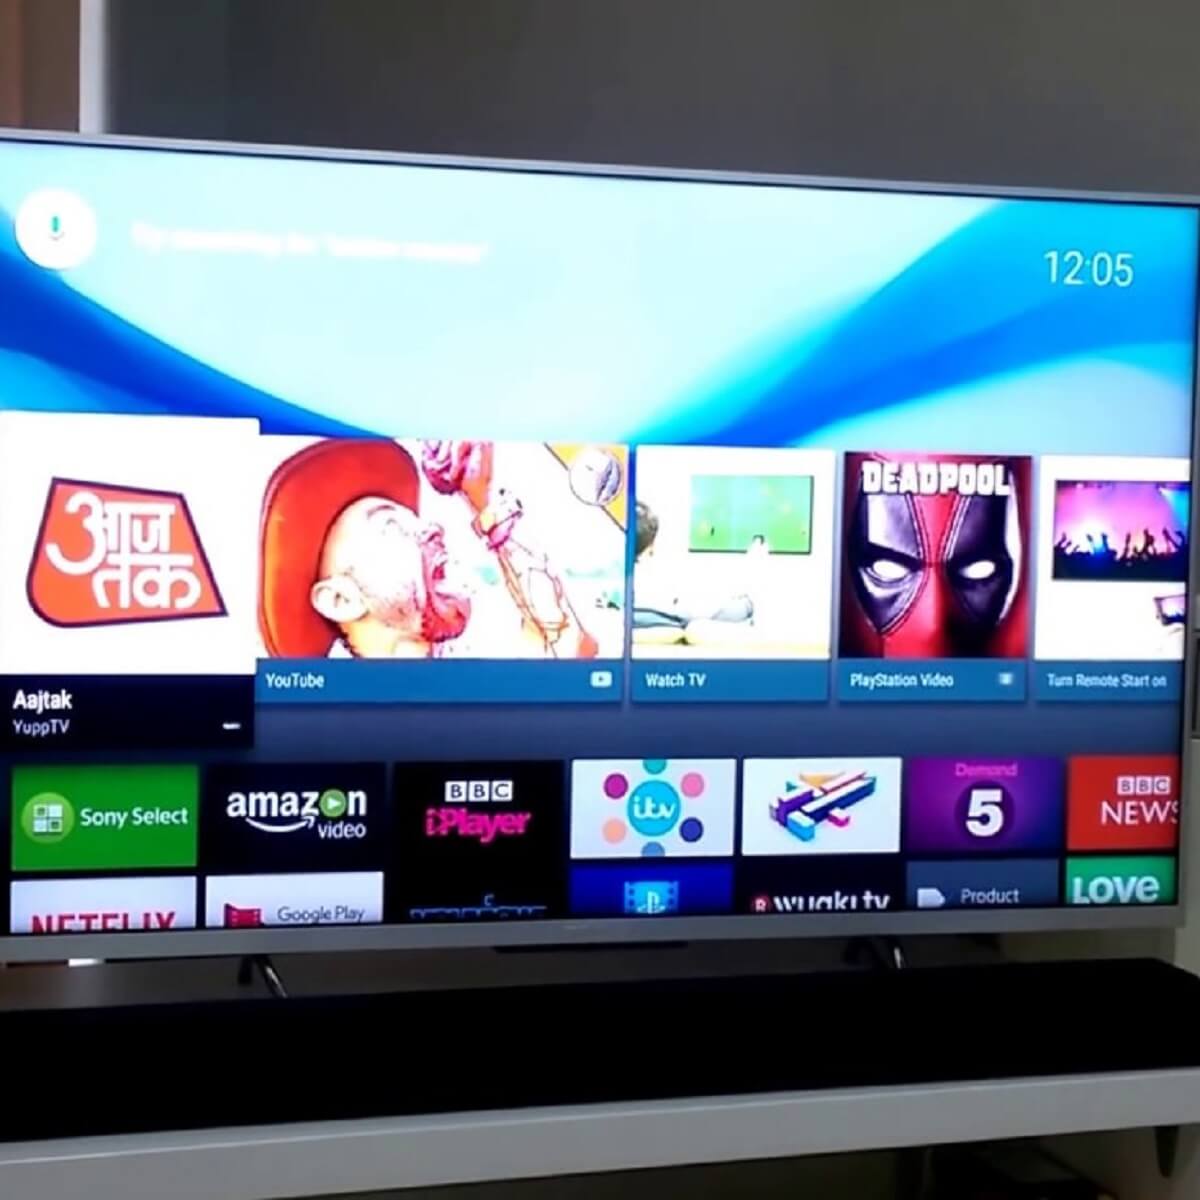 how to install apps on sony smart tv